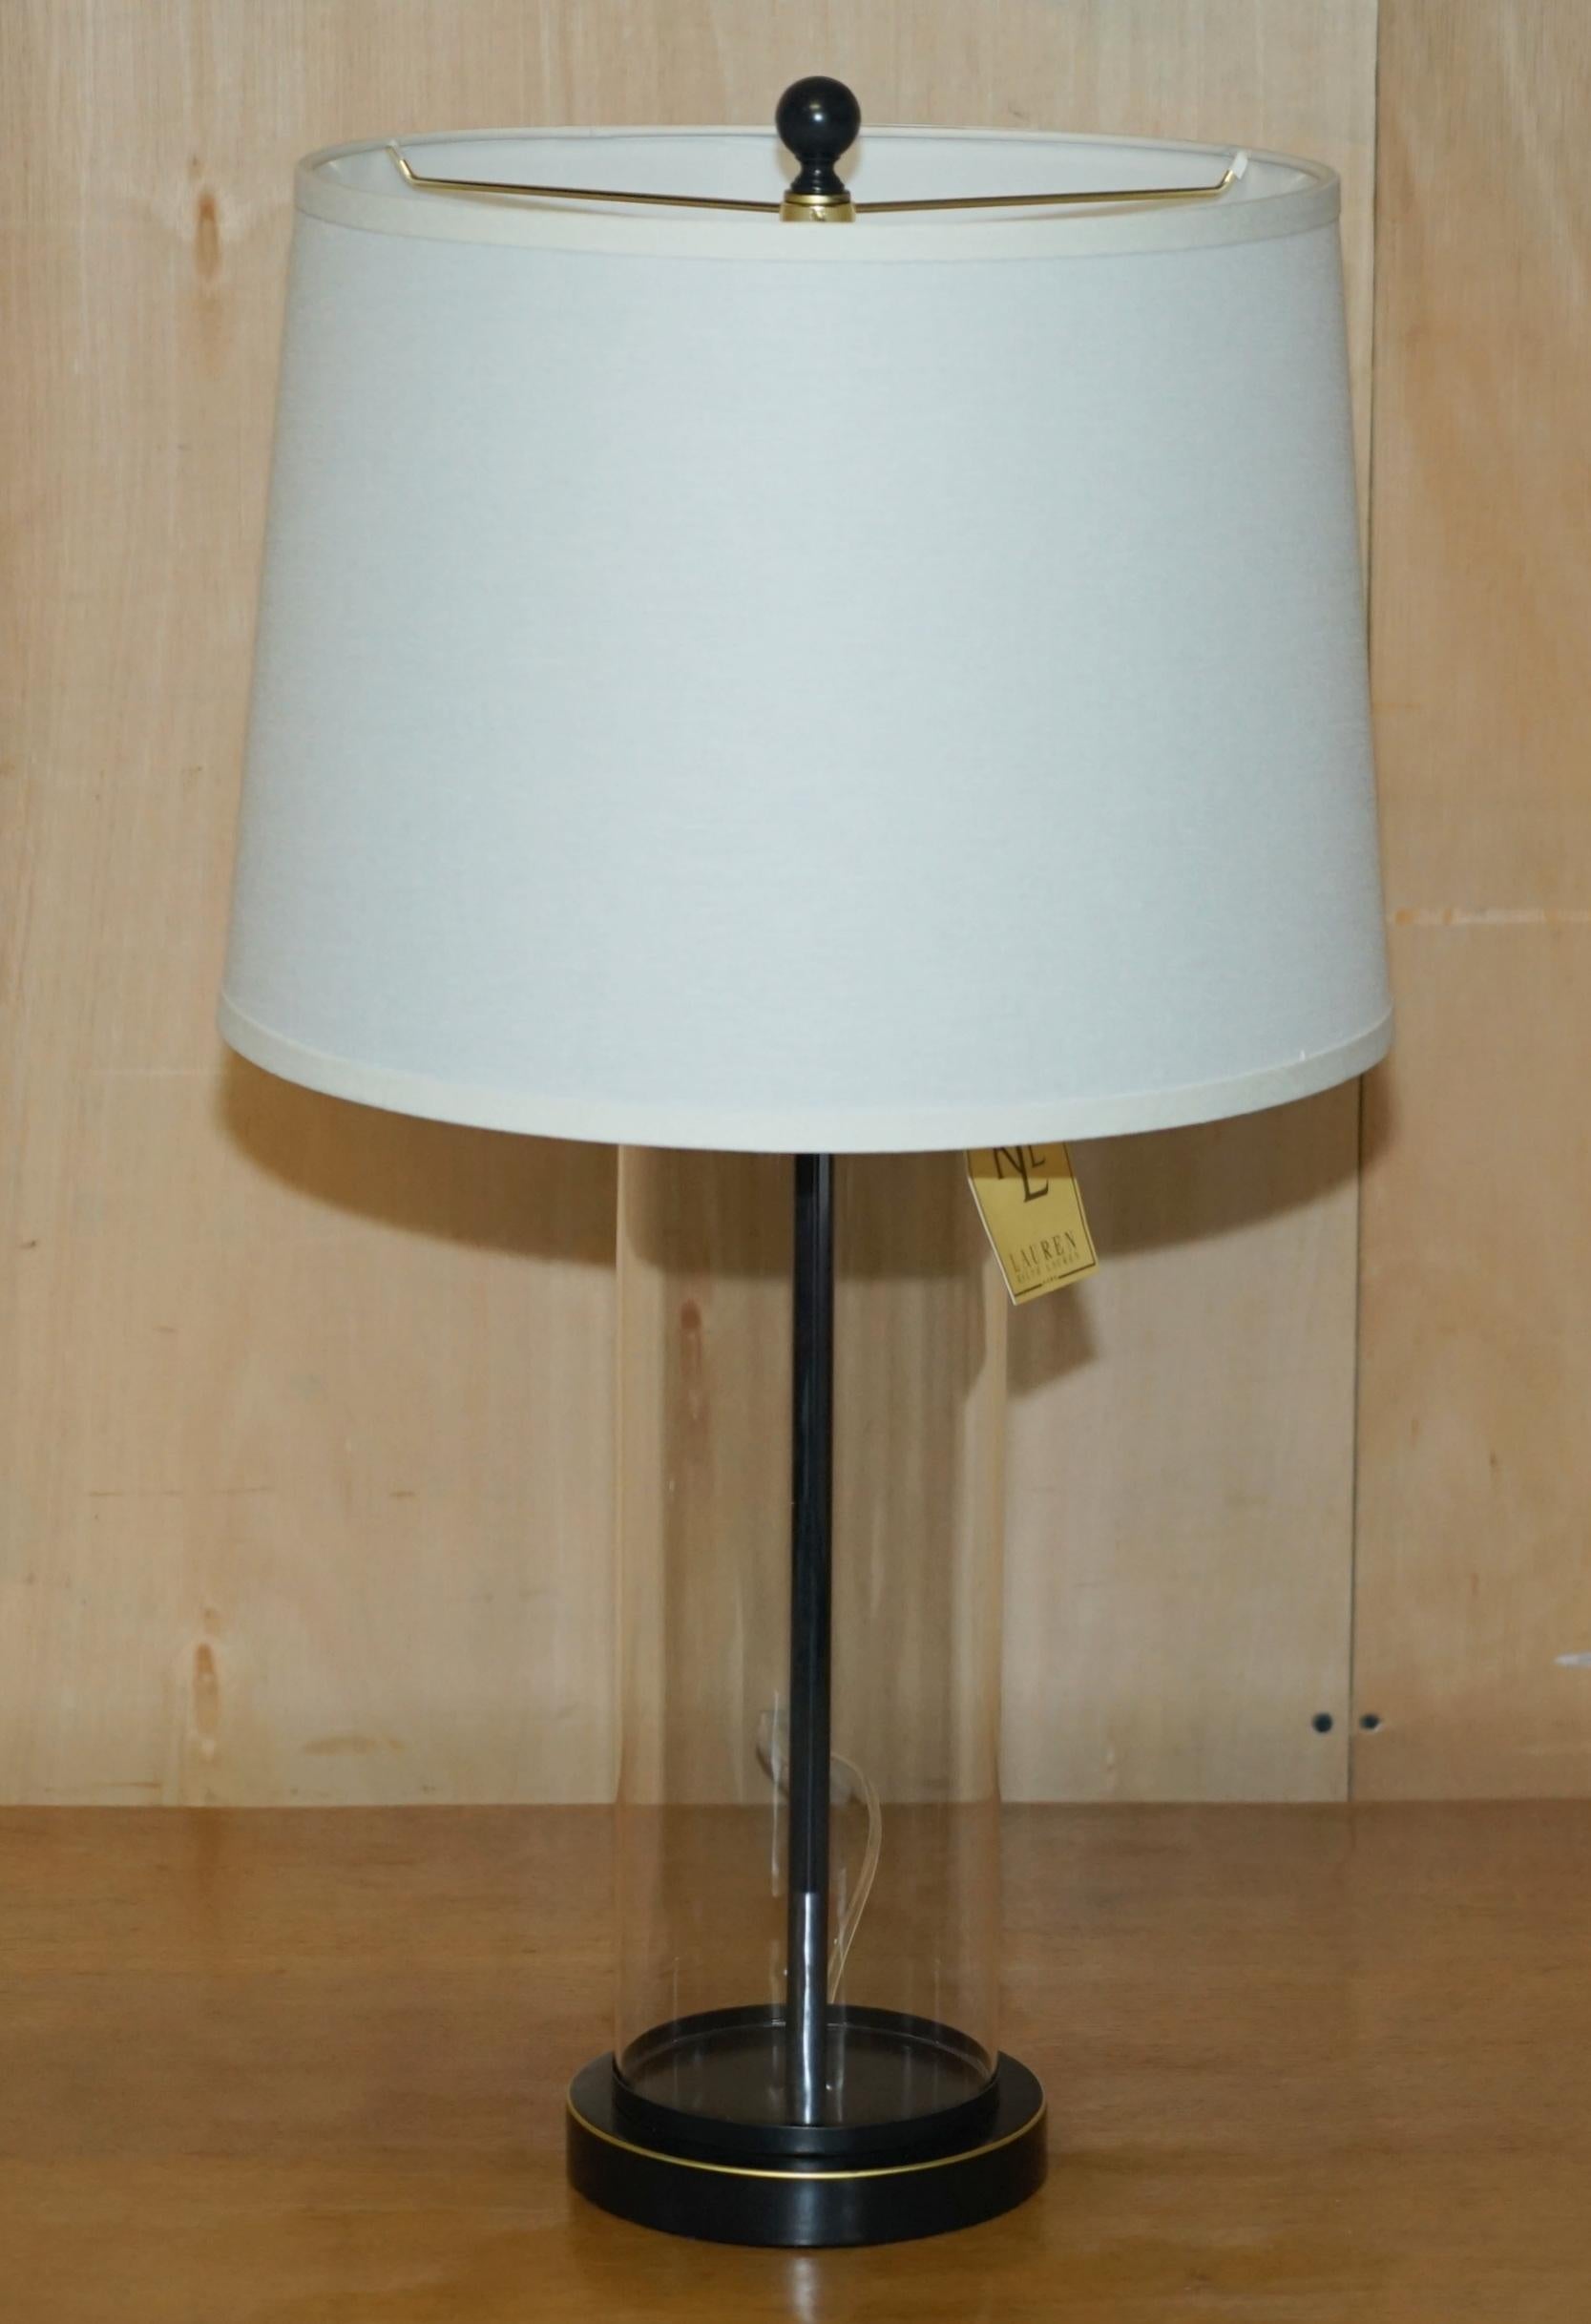 Art Deco 1 OF 4 BRAND NEW IN THE BOX RALPH LAUREN NAVY STORM LANTERN GLASS TABLE LAMPs For Sale